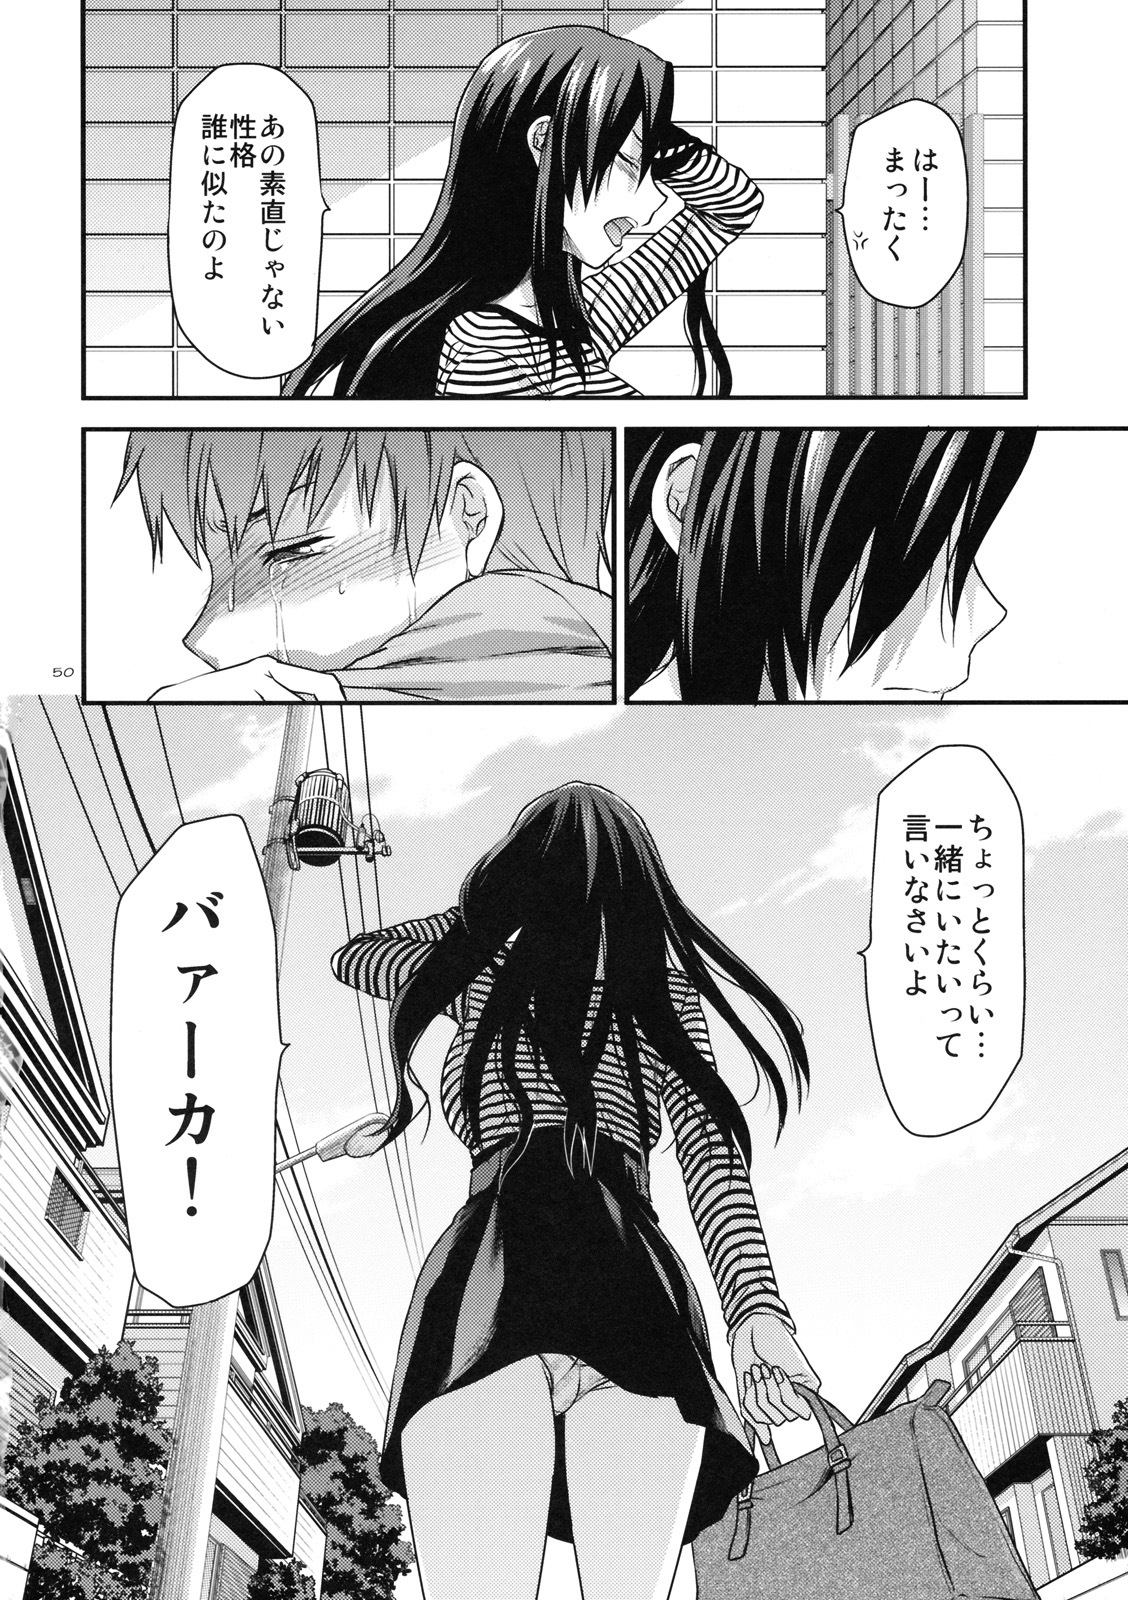 (SC49) [Lv.X+ (Yuzuki N Dash)] Another Another World page 49 full